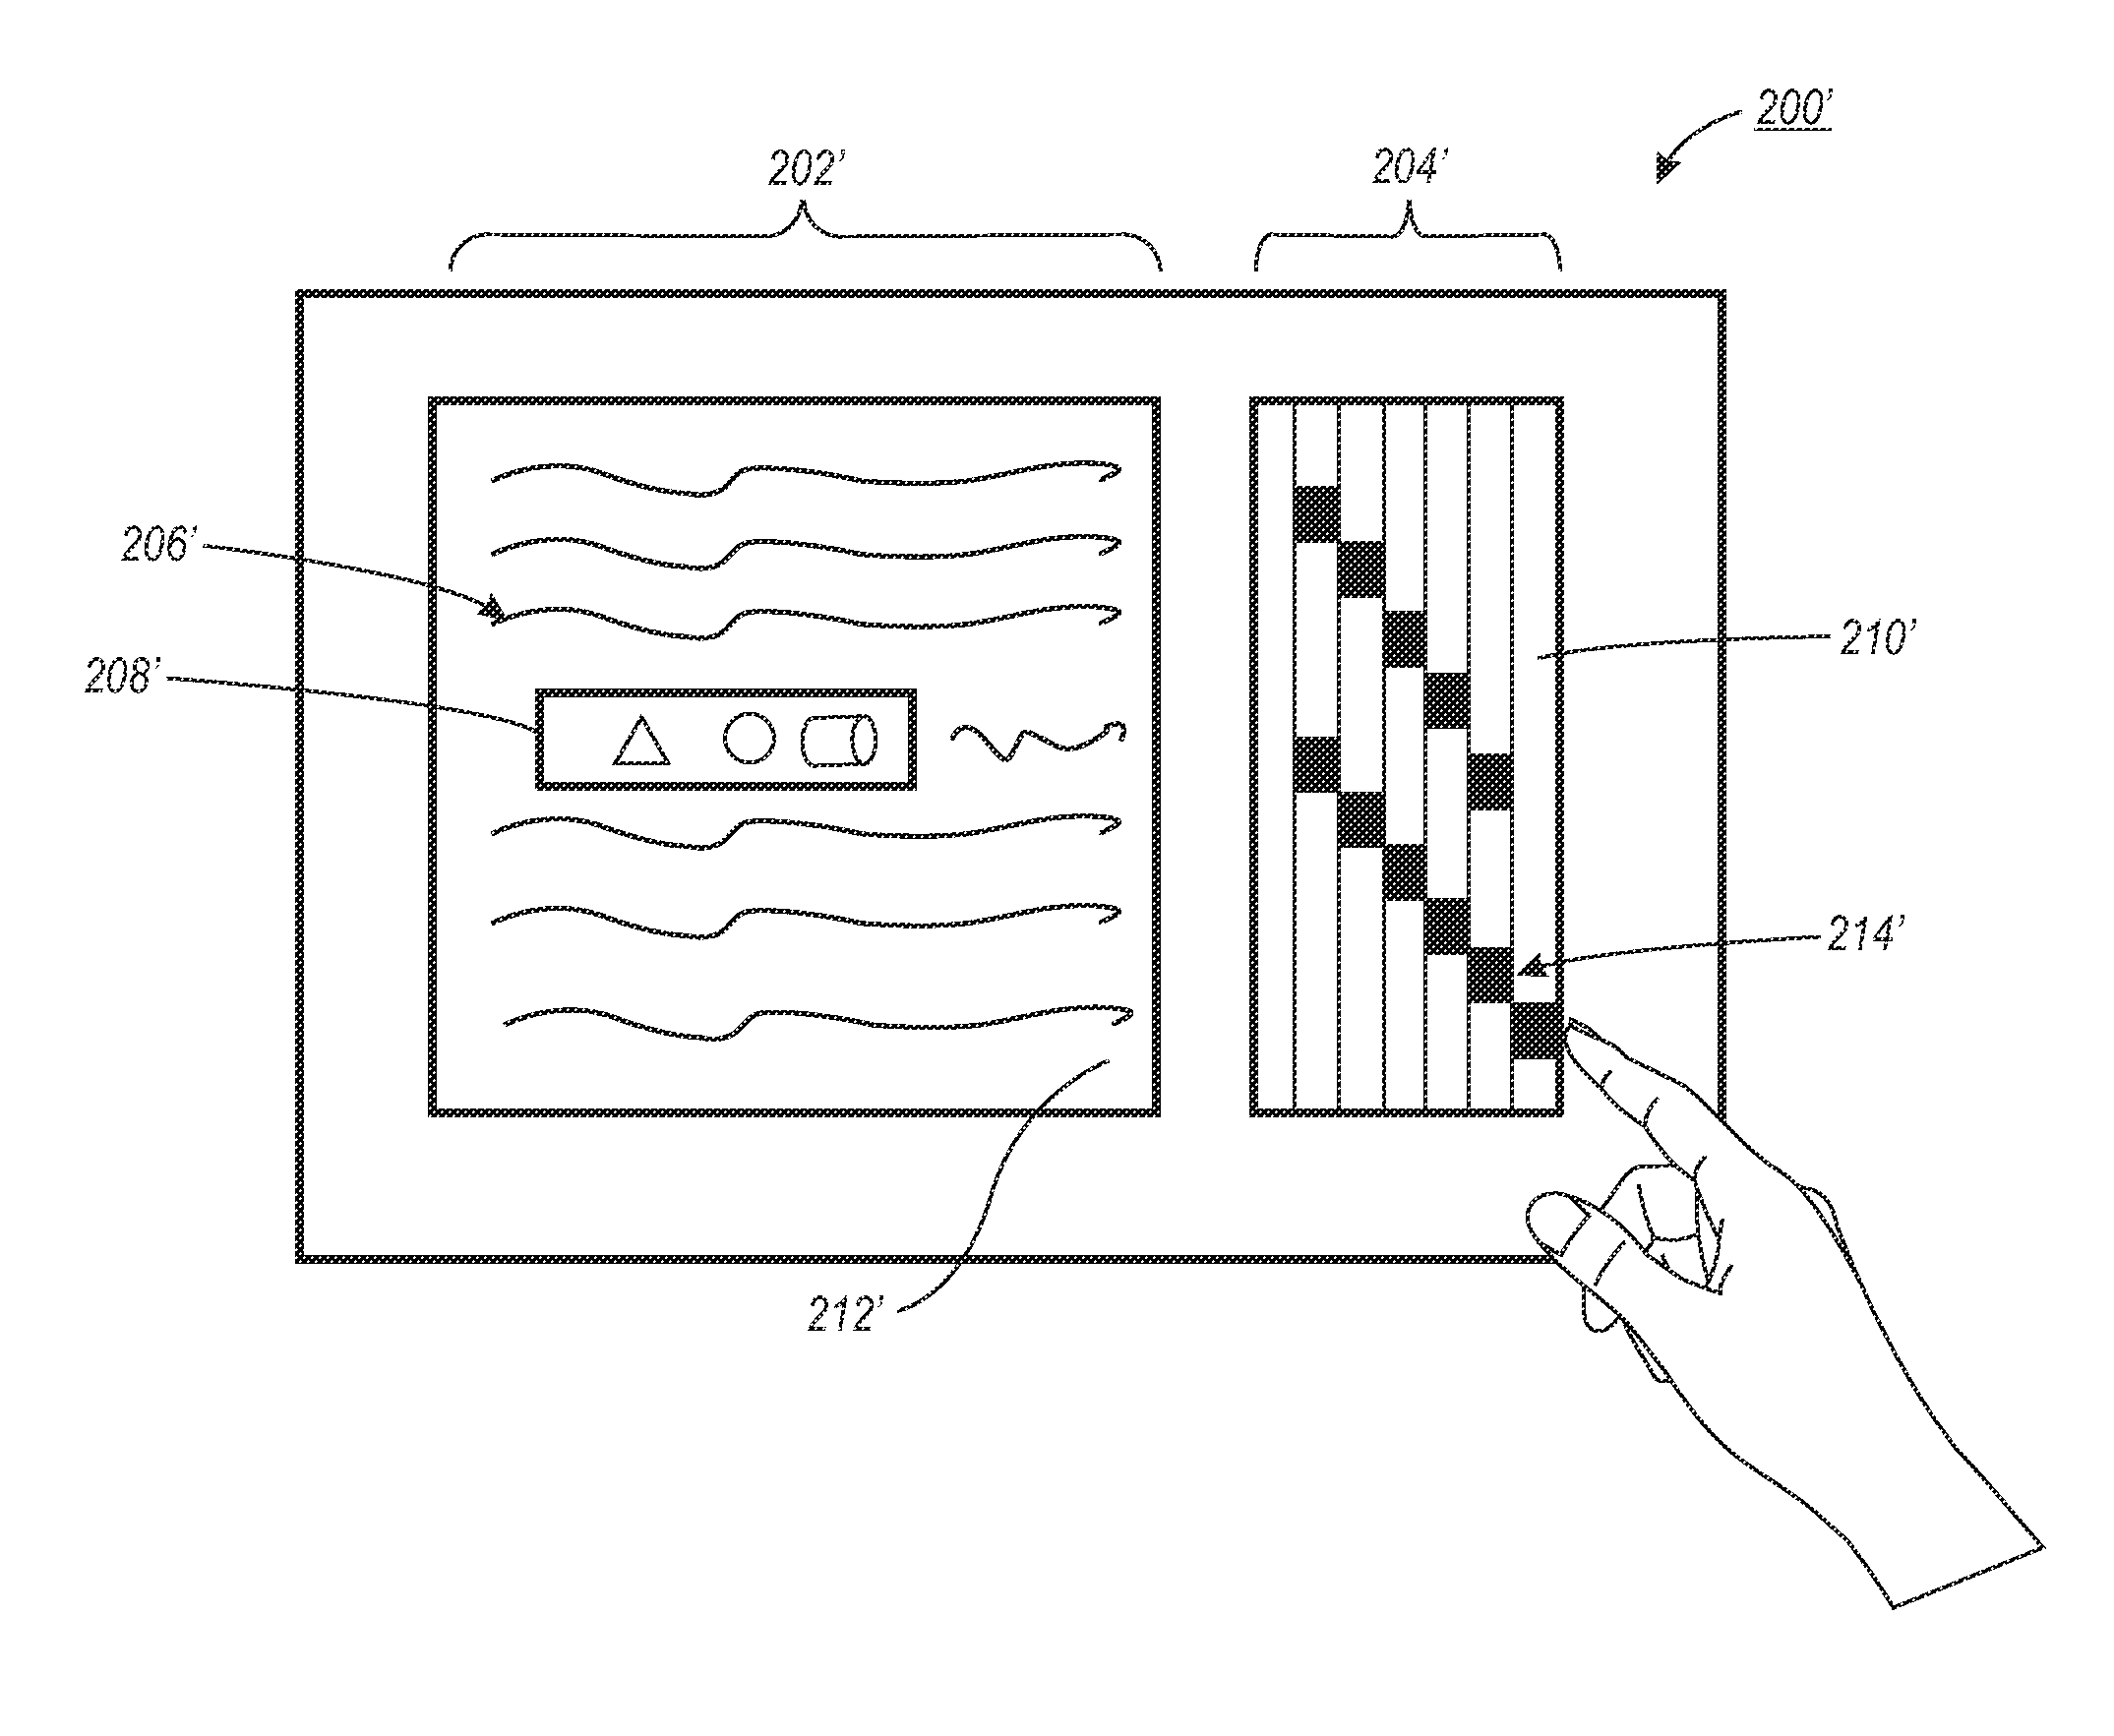 Interface that allows a user to riffle through pages of an electronic document